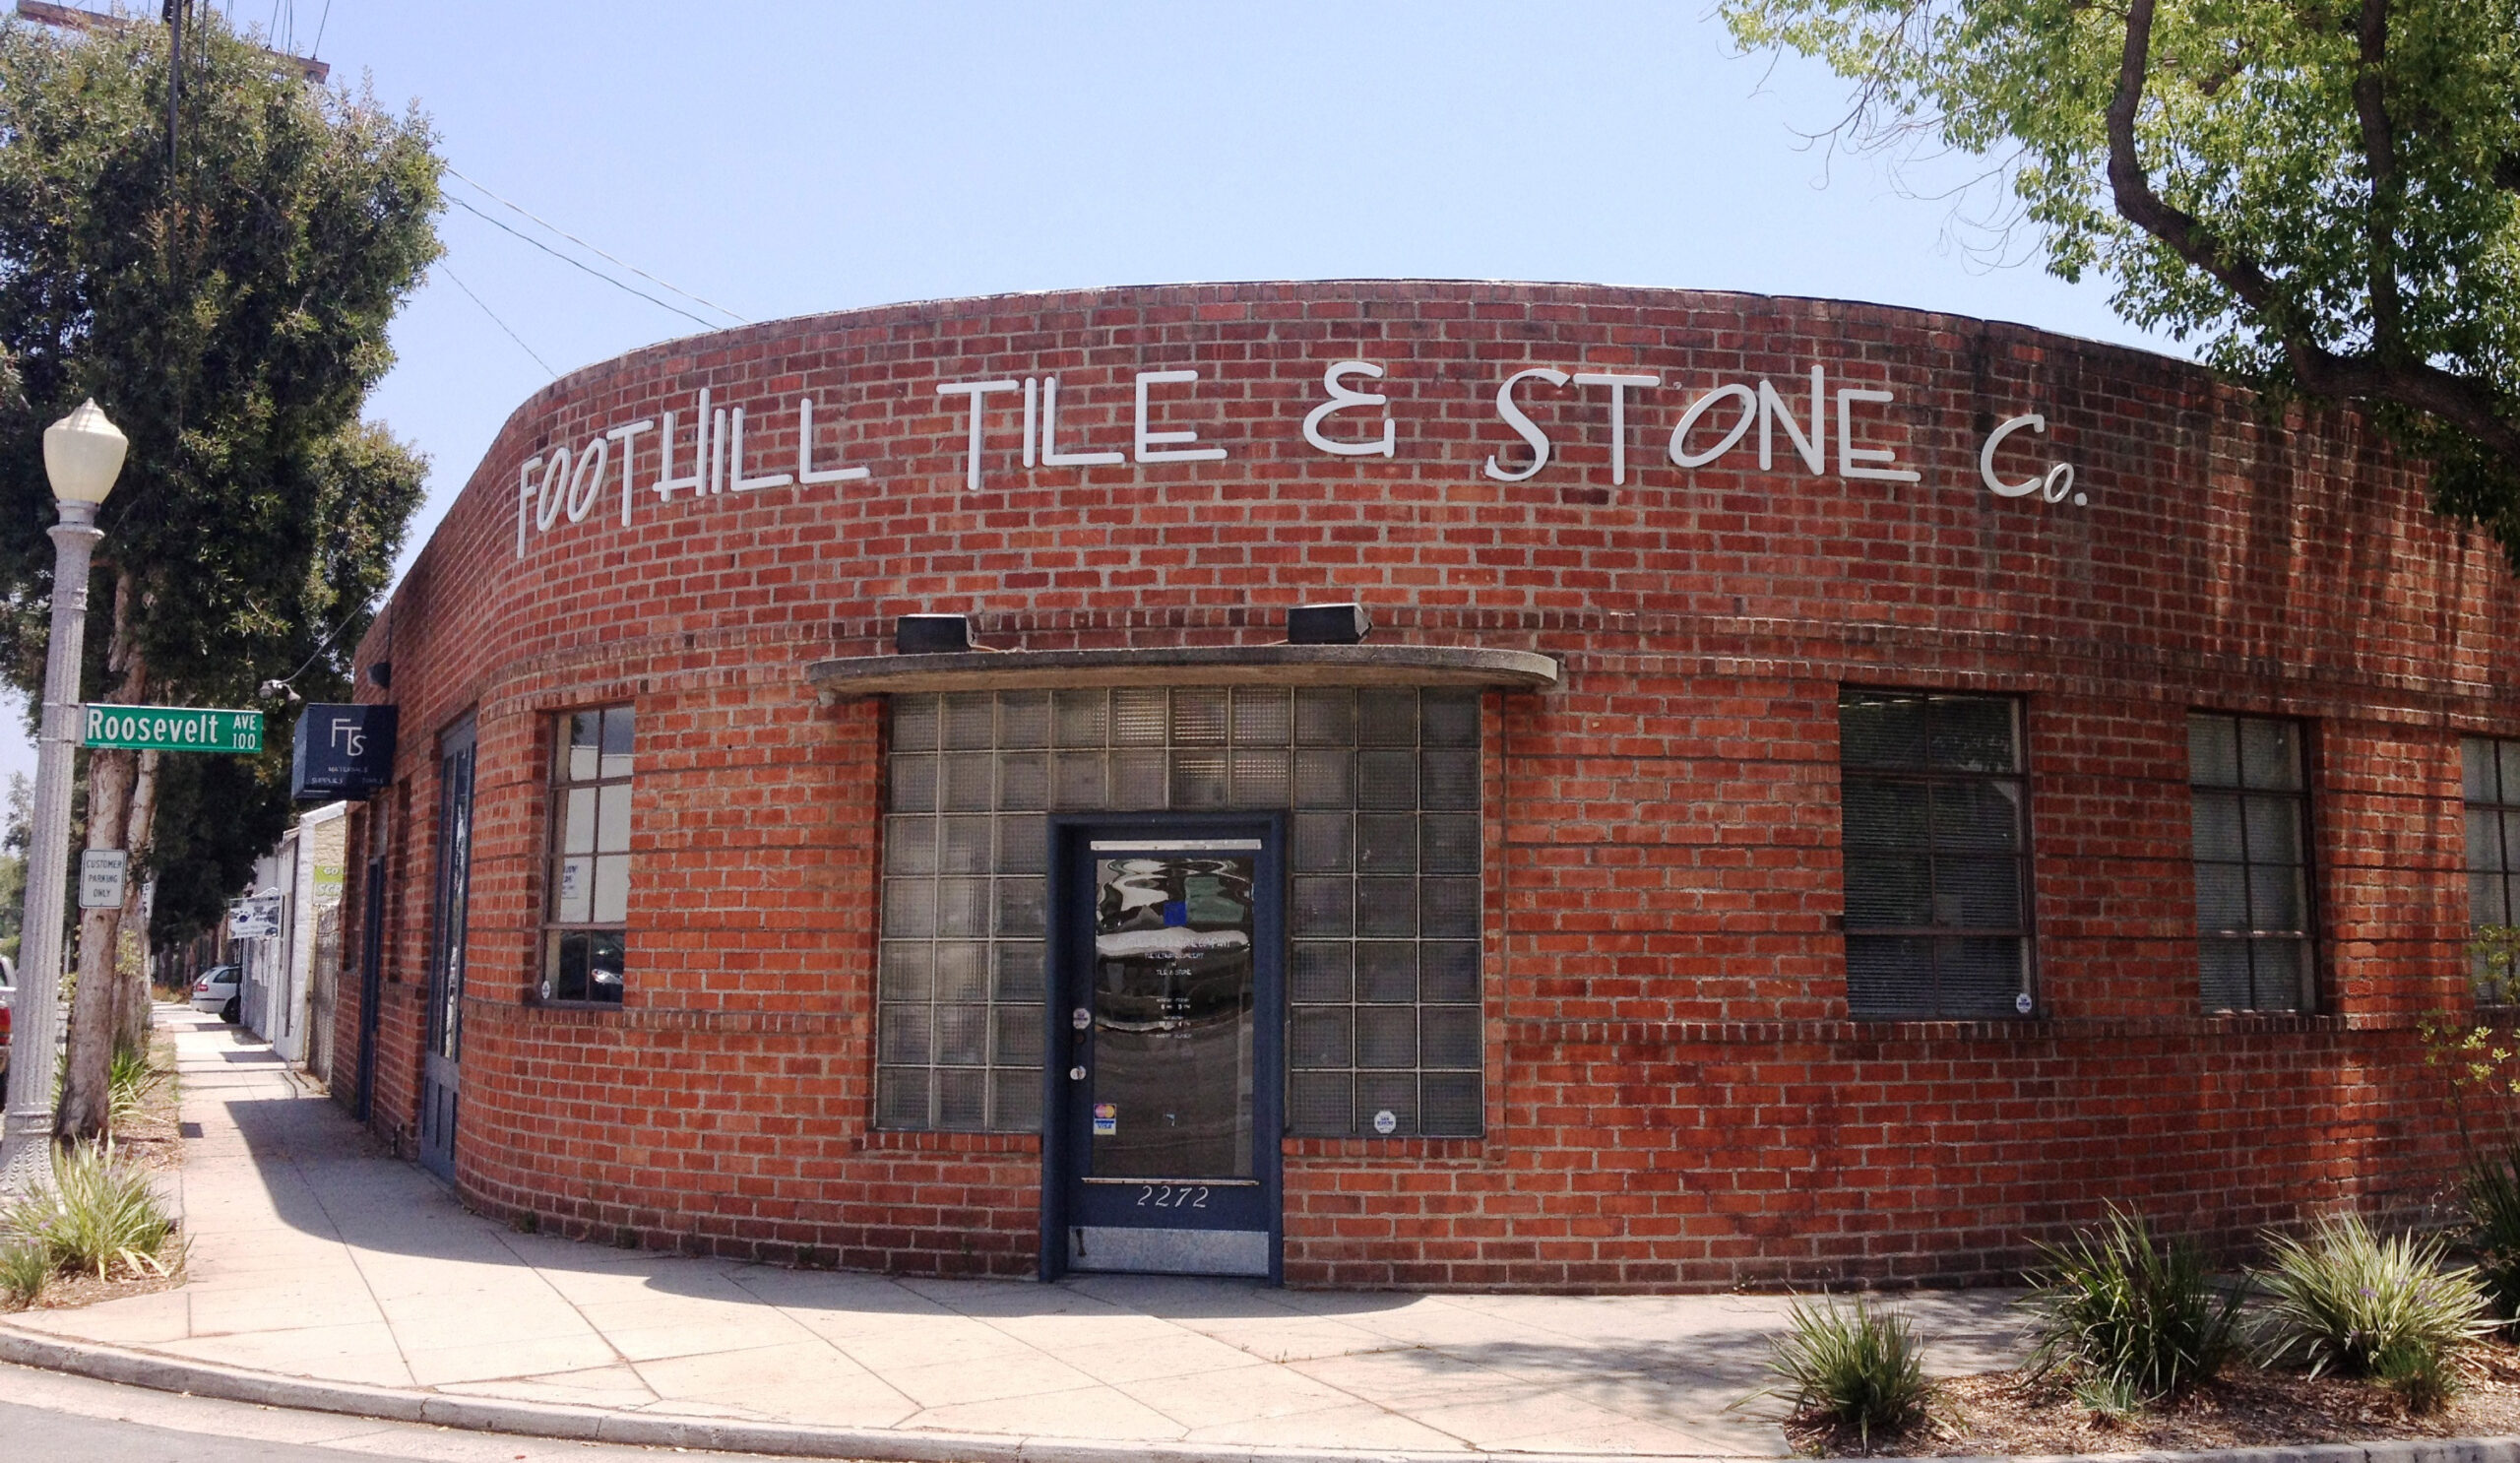 Foothill Tile & Stone Co building front